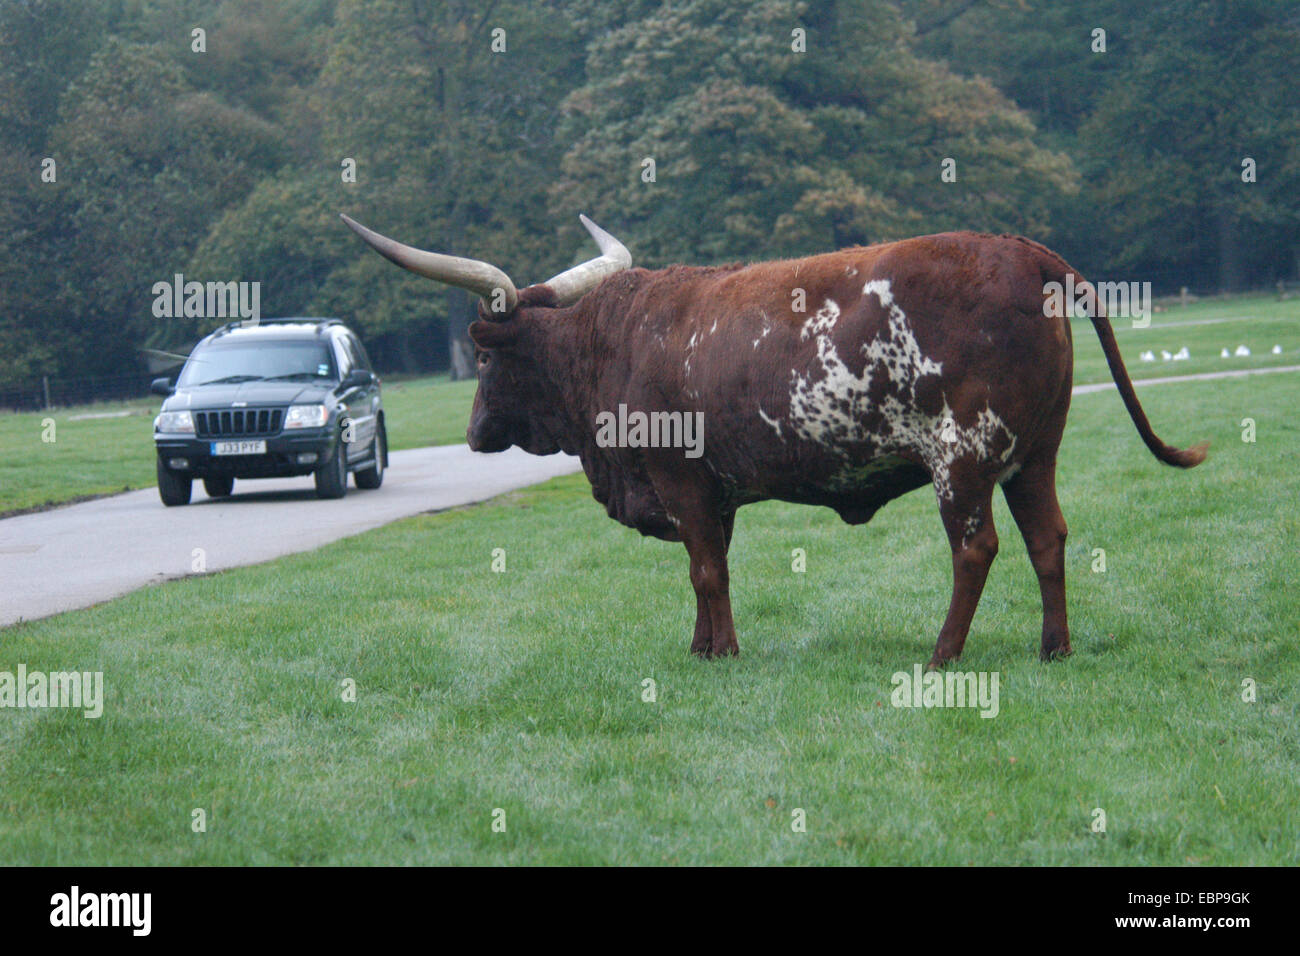 Watusi cattle (Bos taurus africanus) looks as visitors drives in a car in the Woburn Safari Park in Bedfordshire, England, UK. Stock Photo